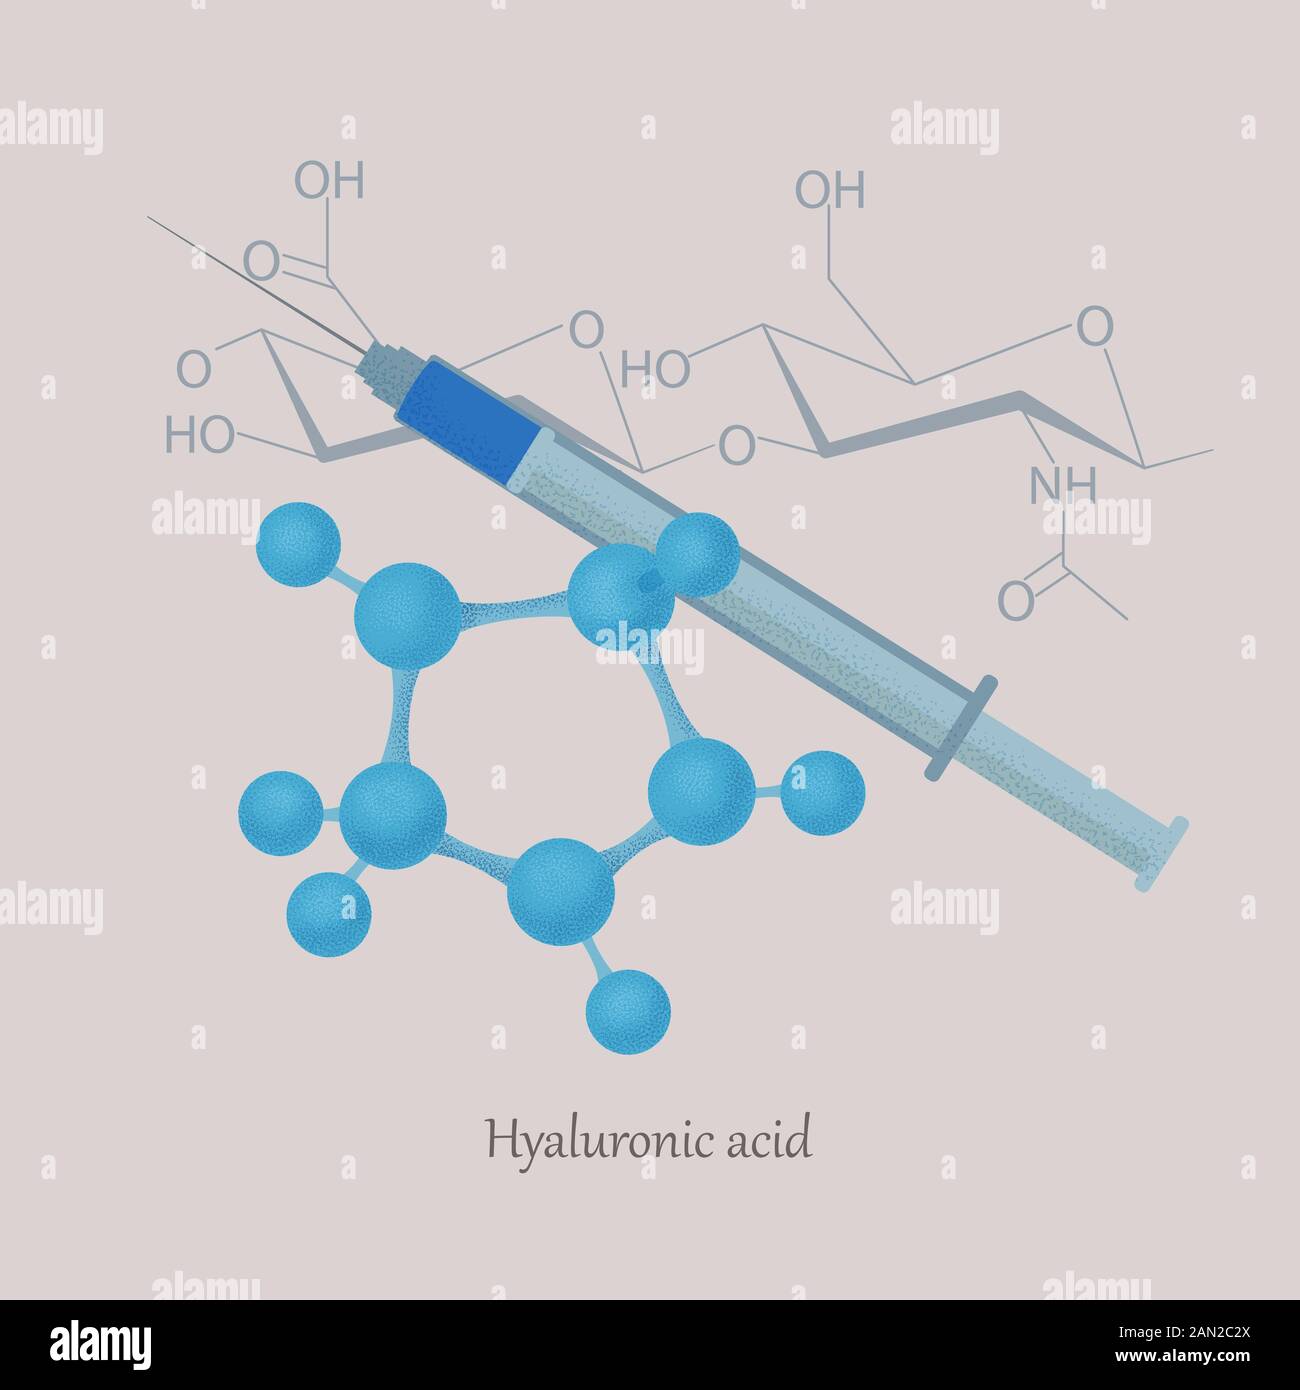 Hyaluronic acid structure and formula with a syringe. Stock Vector